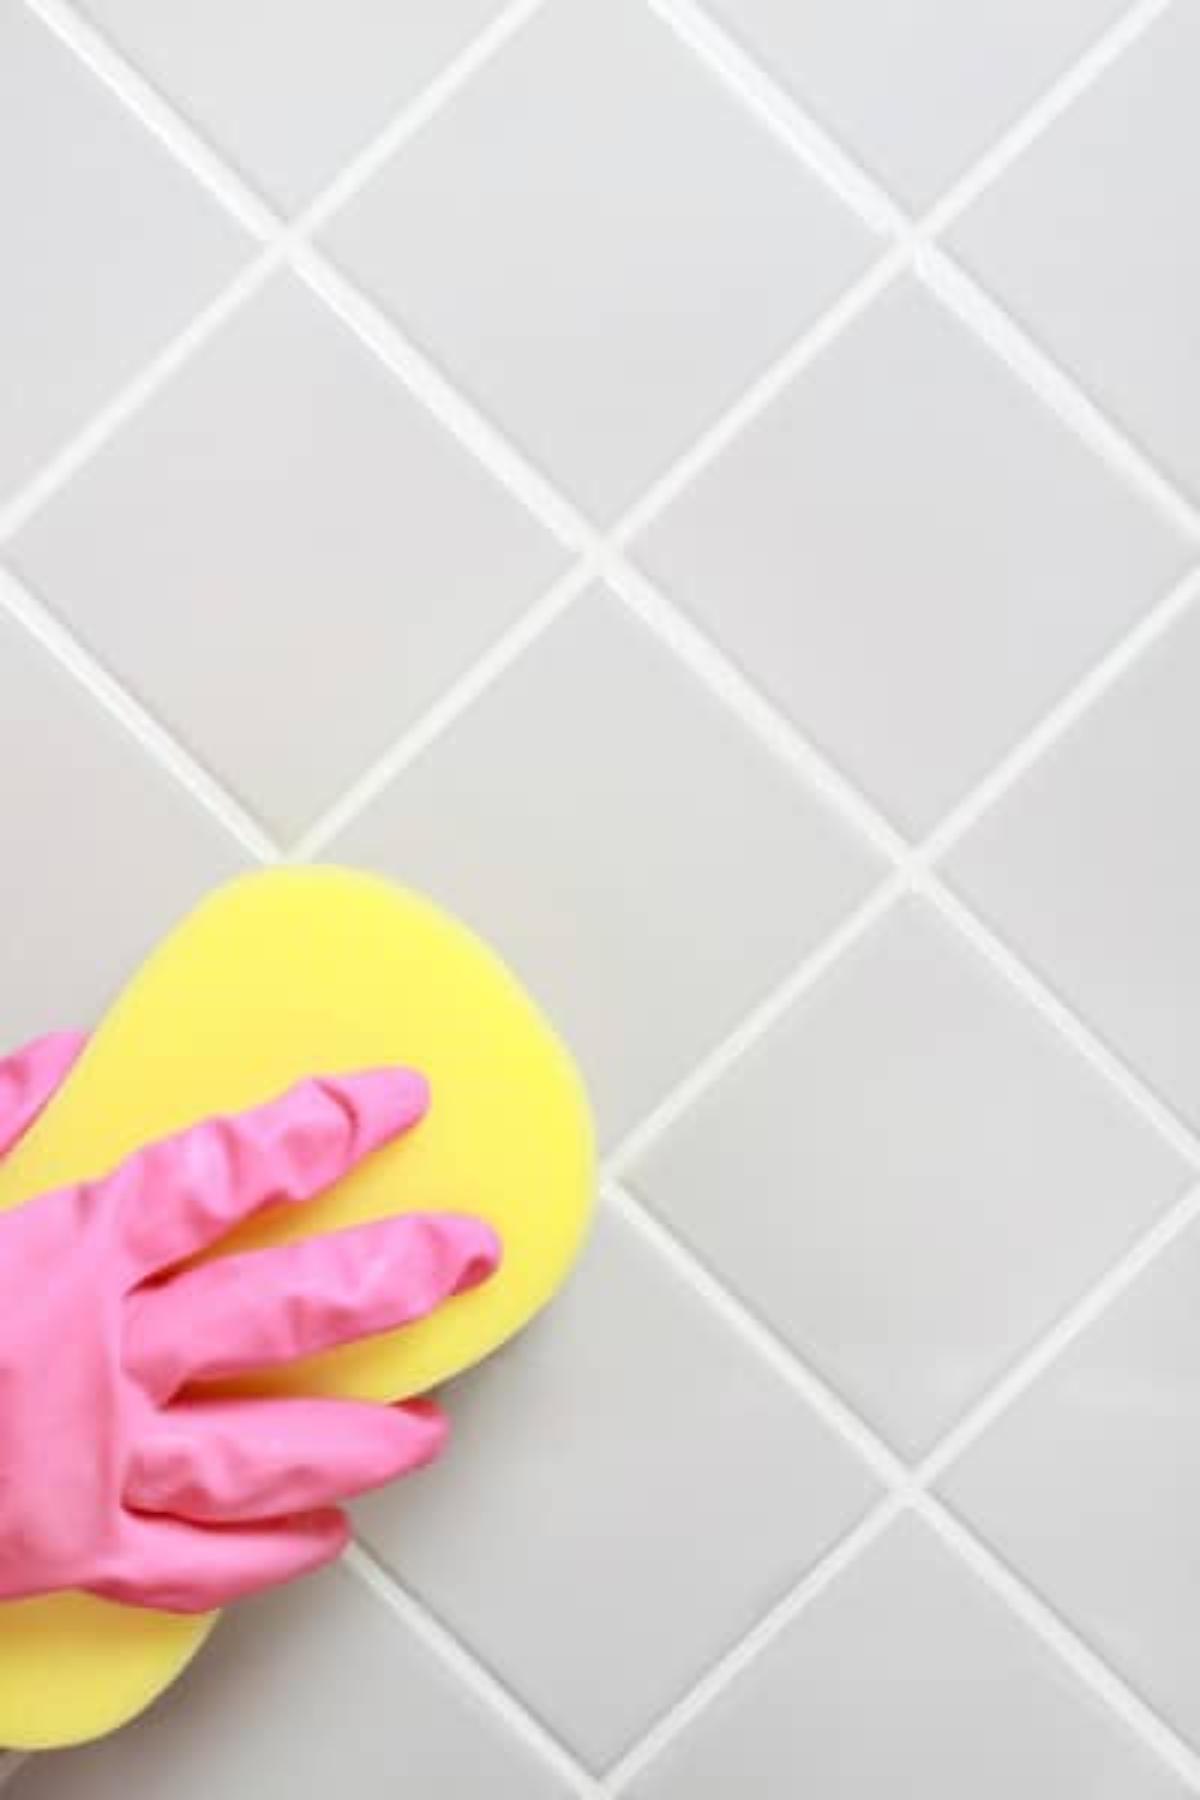 Cleaning tiles